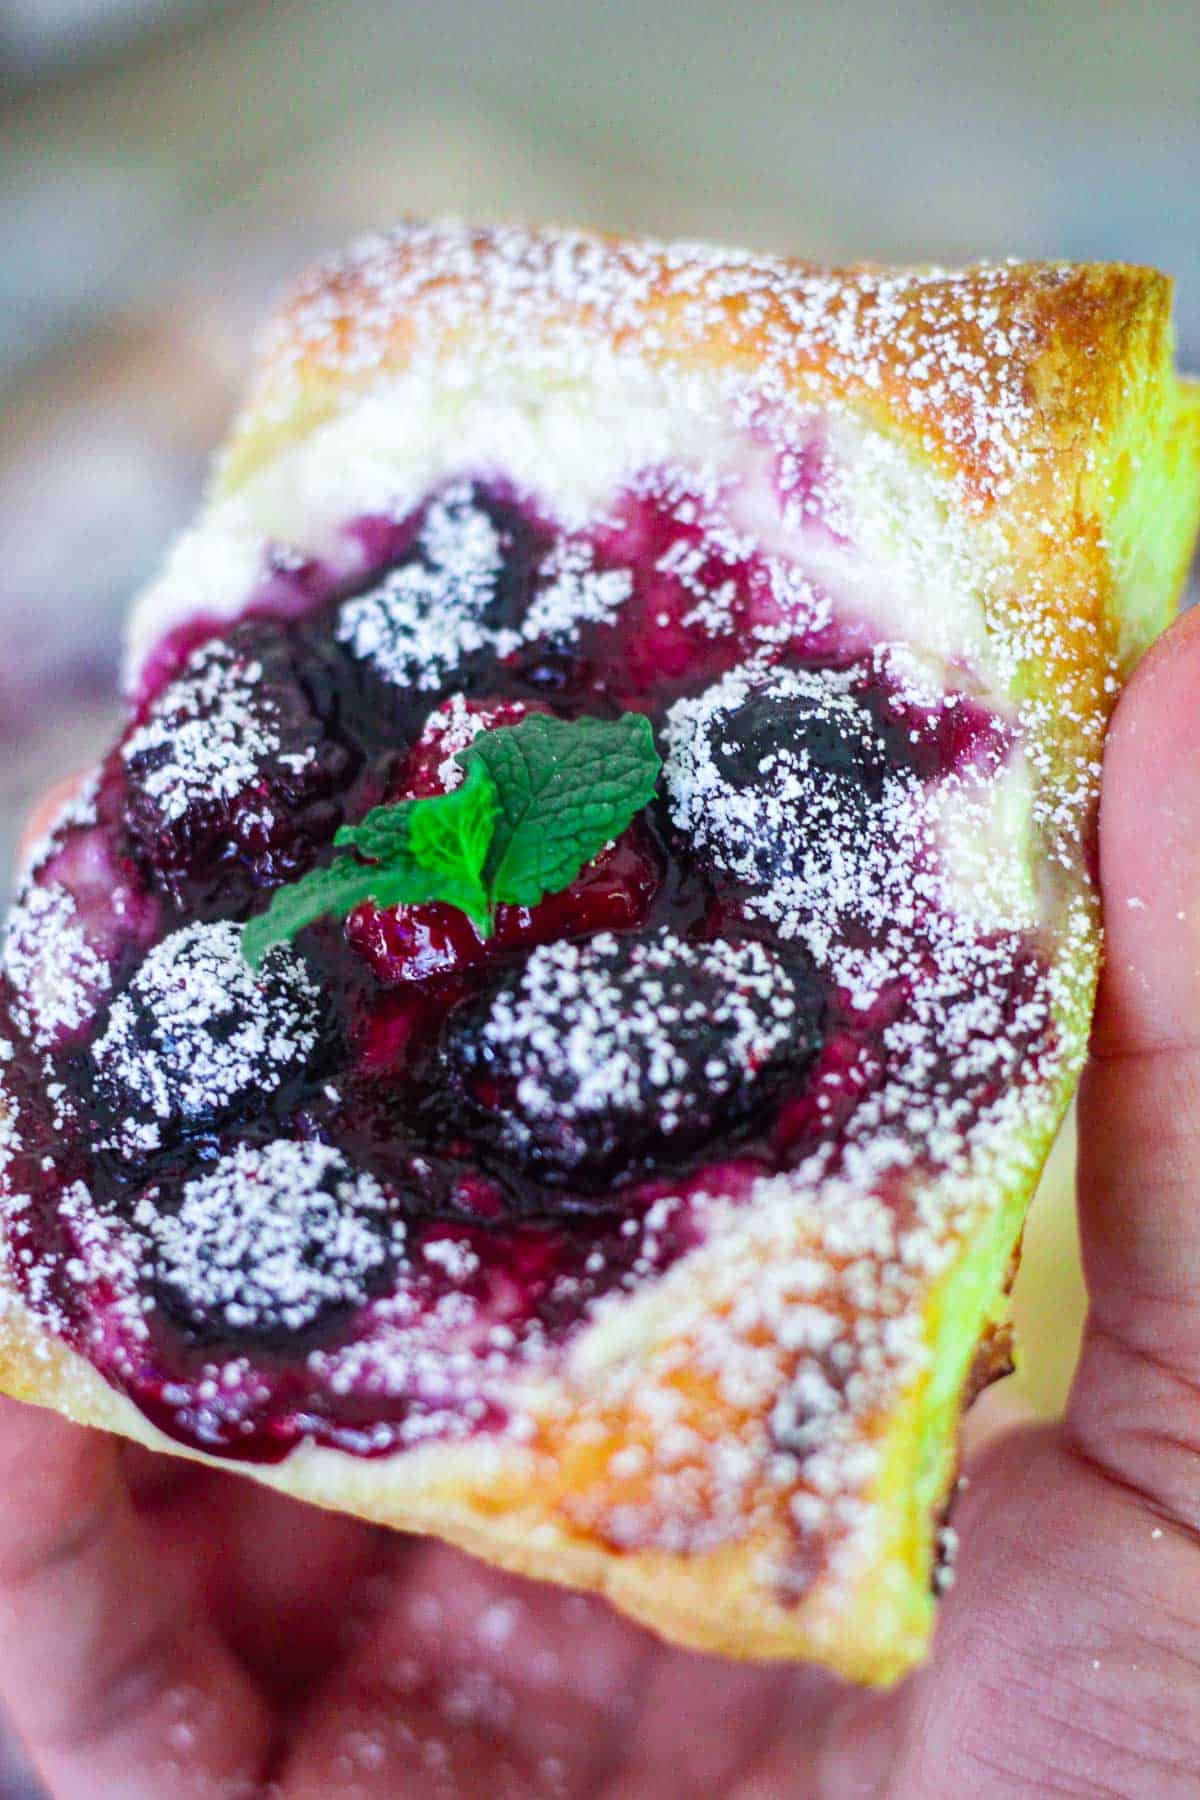 A single puff pastry tart with berries, shown towards the camera being held in one hand. Tart is garnished with powdered sugar and mint leaves.